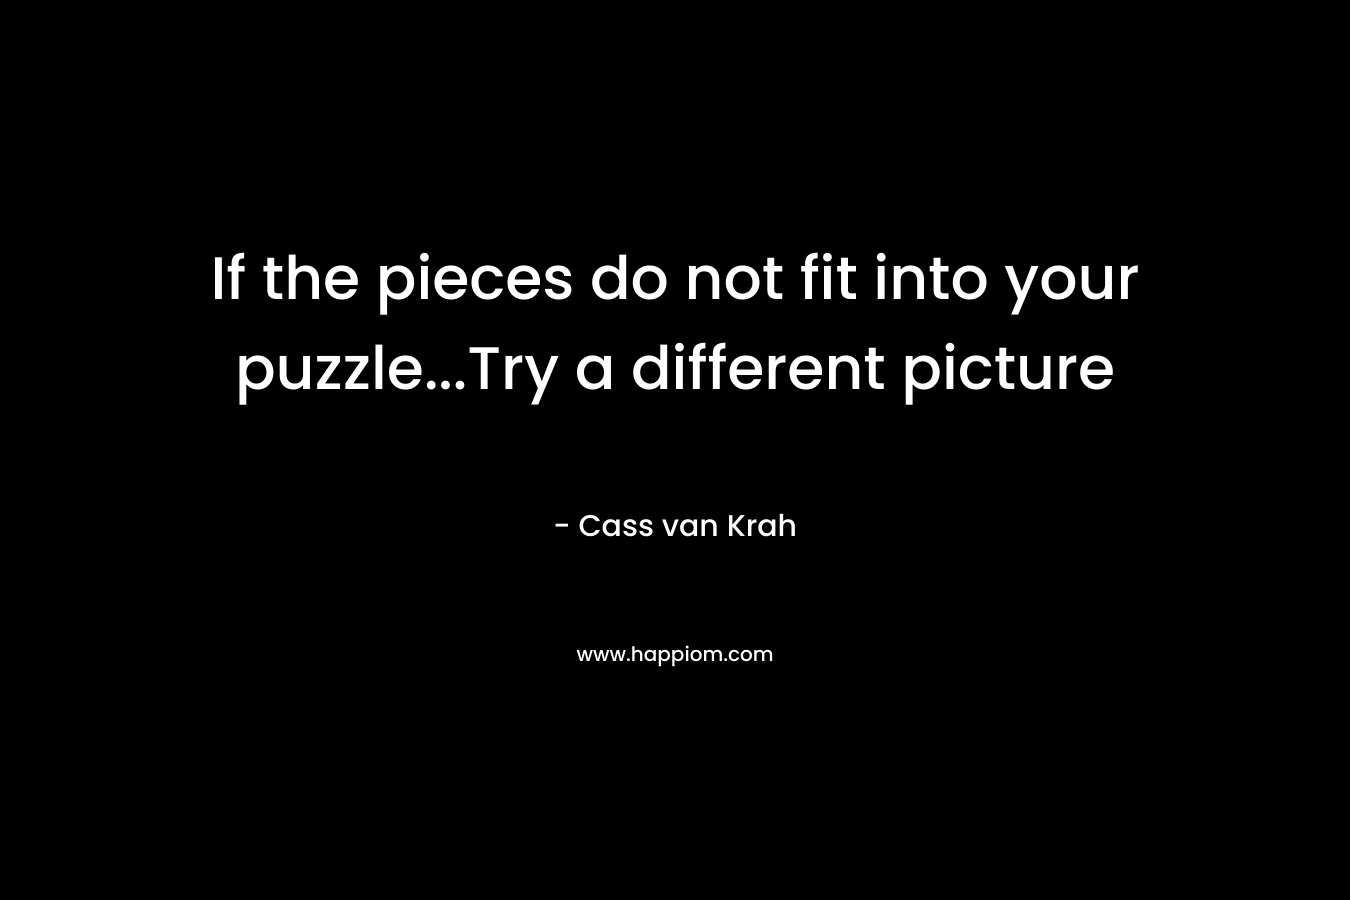 If the pieces do not fit into your puzzle...Try a different picture